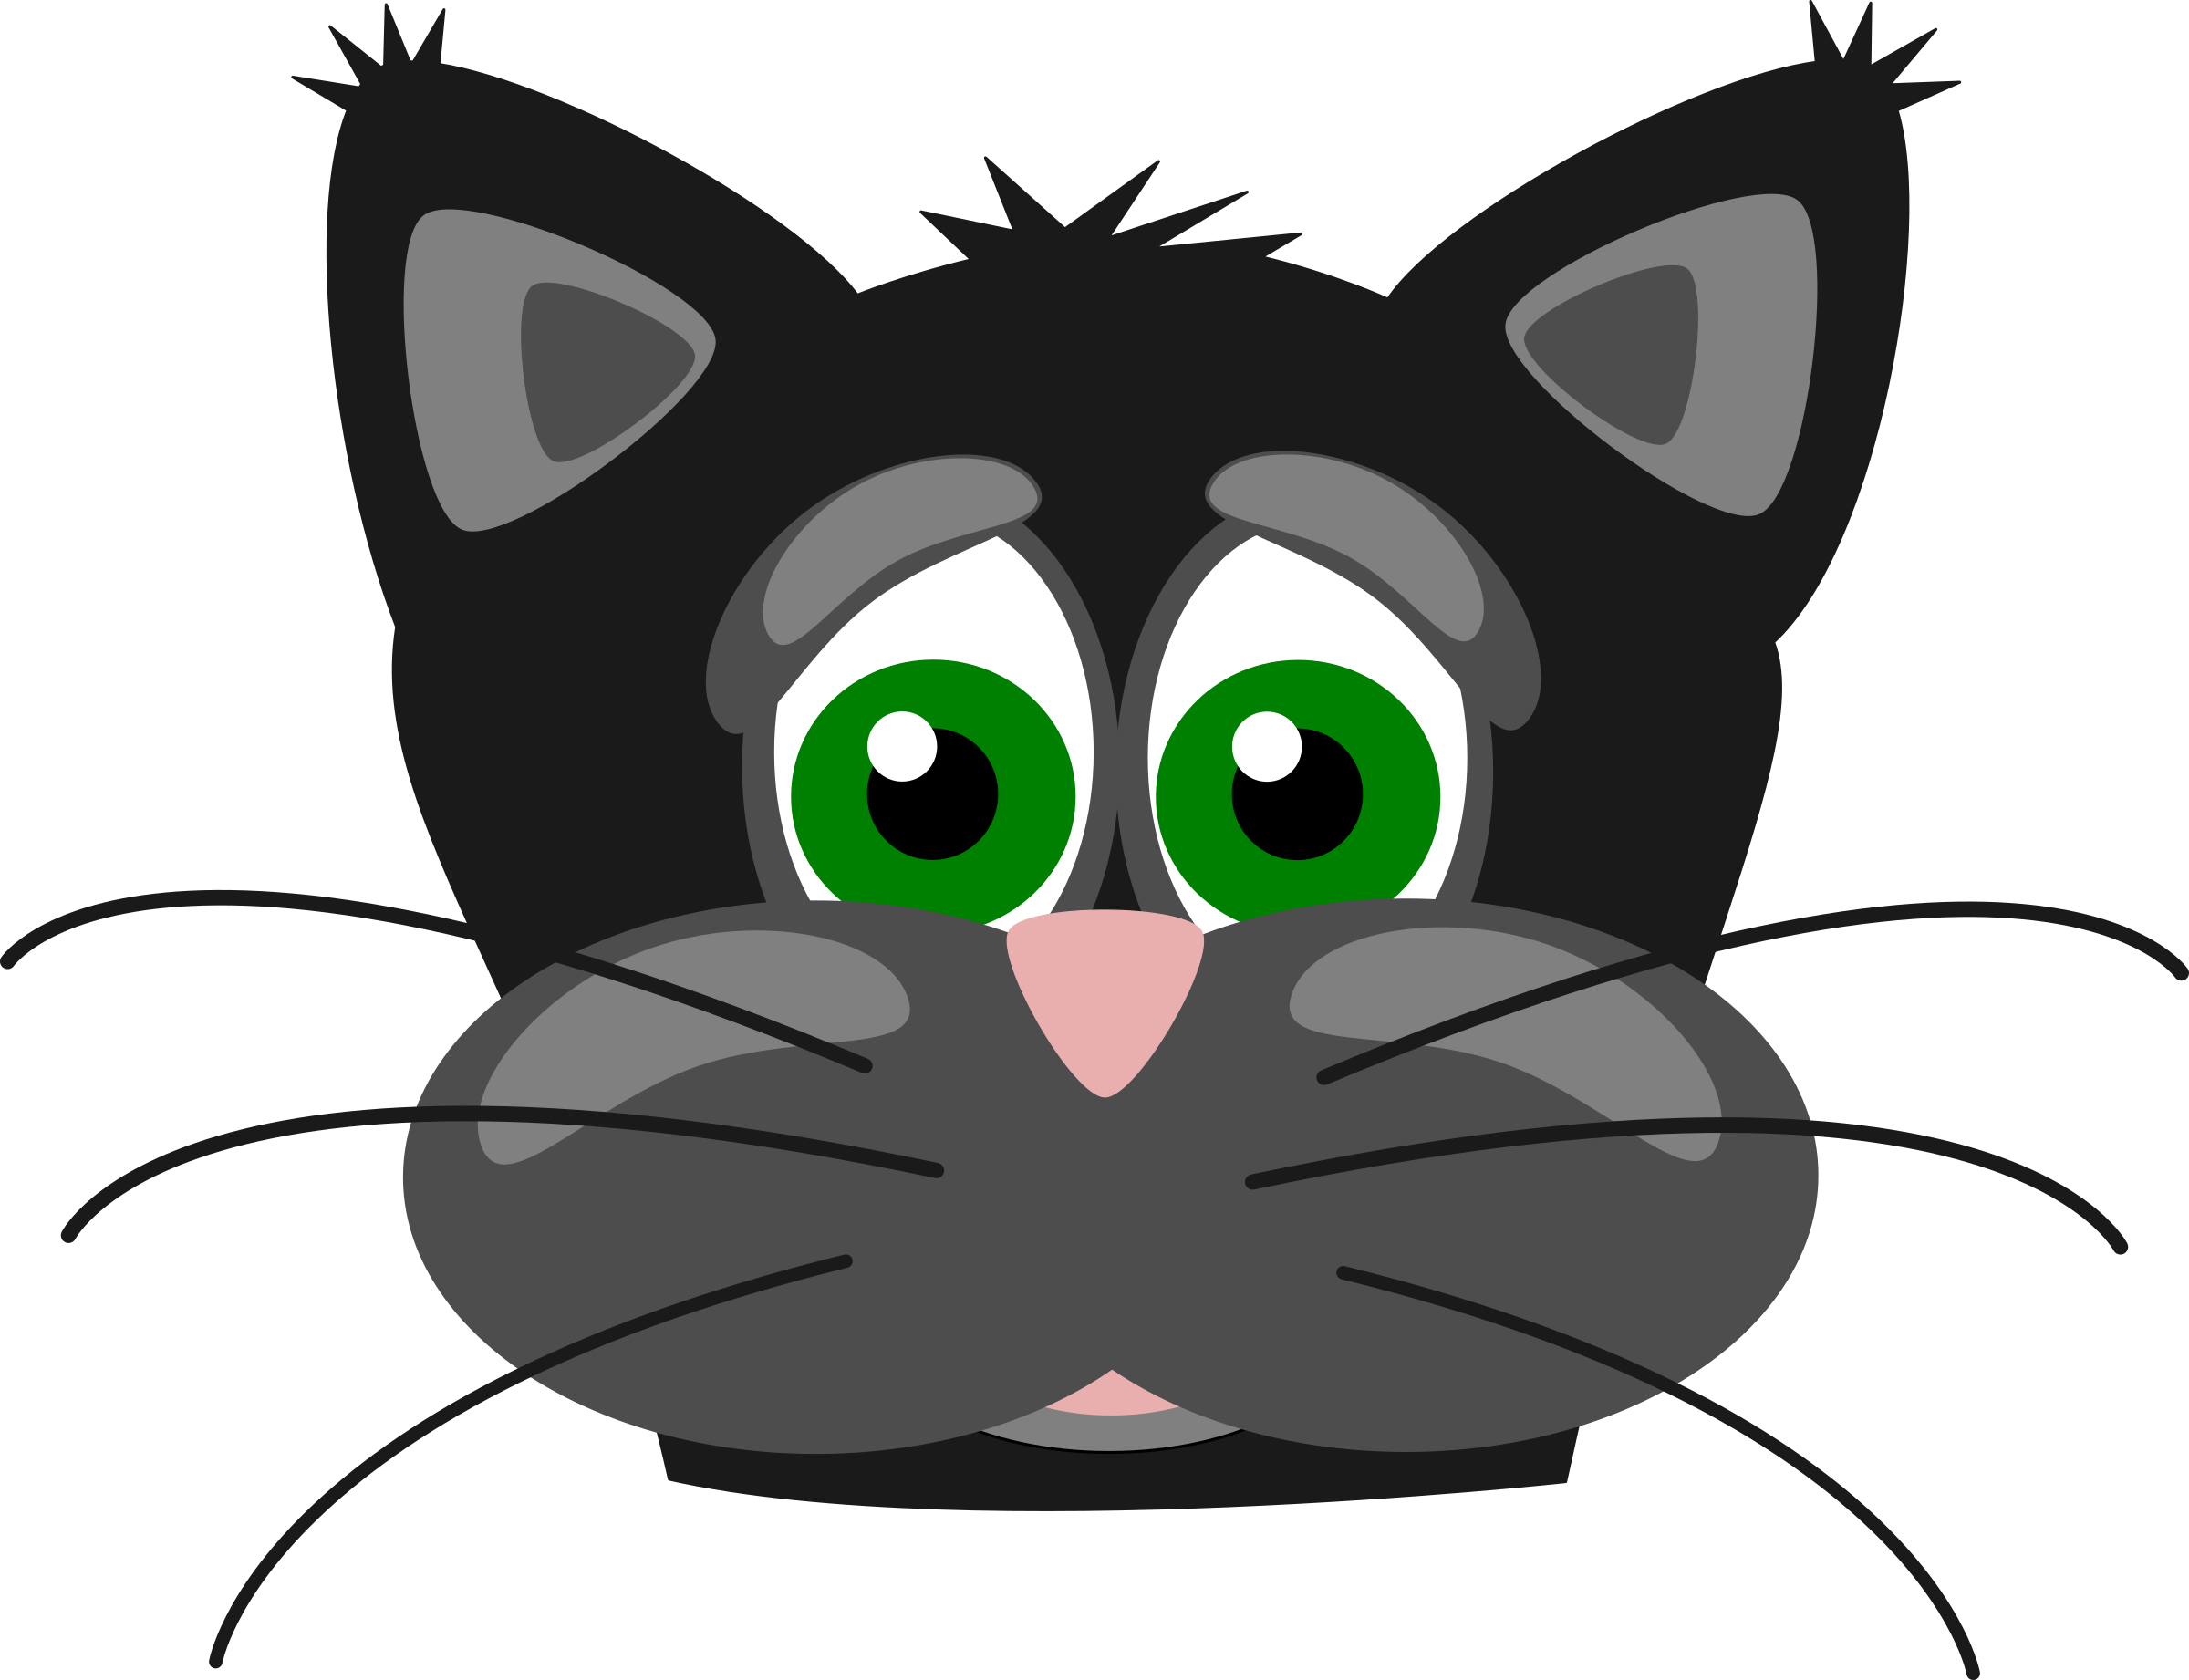 Kitten clipart pusa. Sad cat icons png